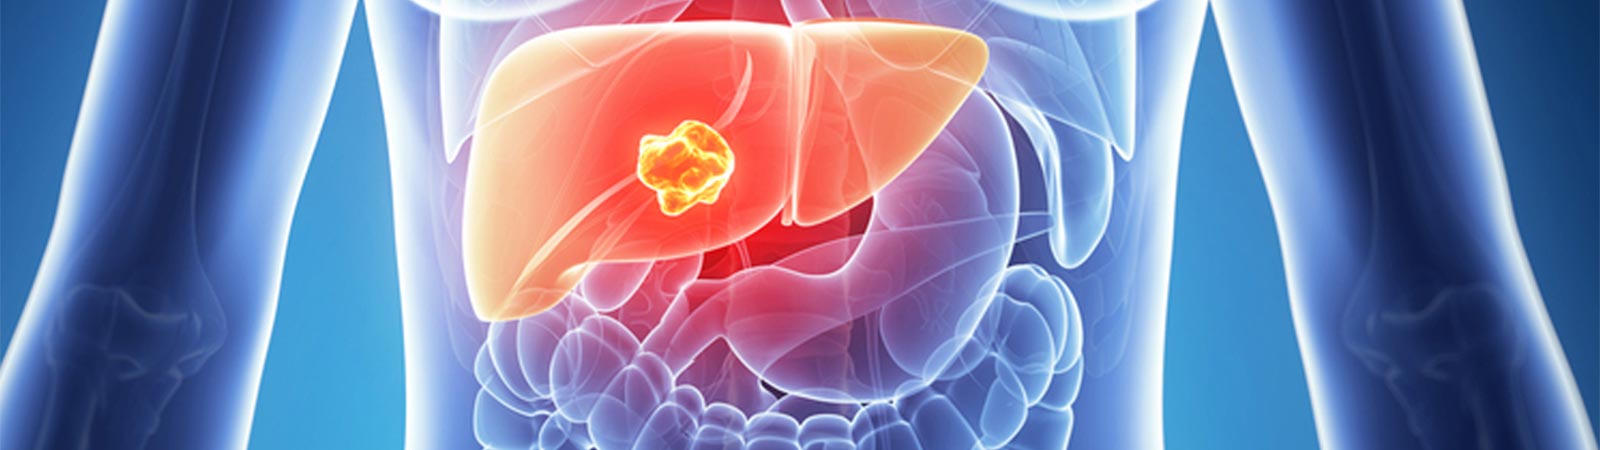 Liver Cancer: Signs, Diagnosis & Treatment in Singapore | PCC Philippines